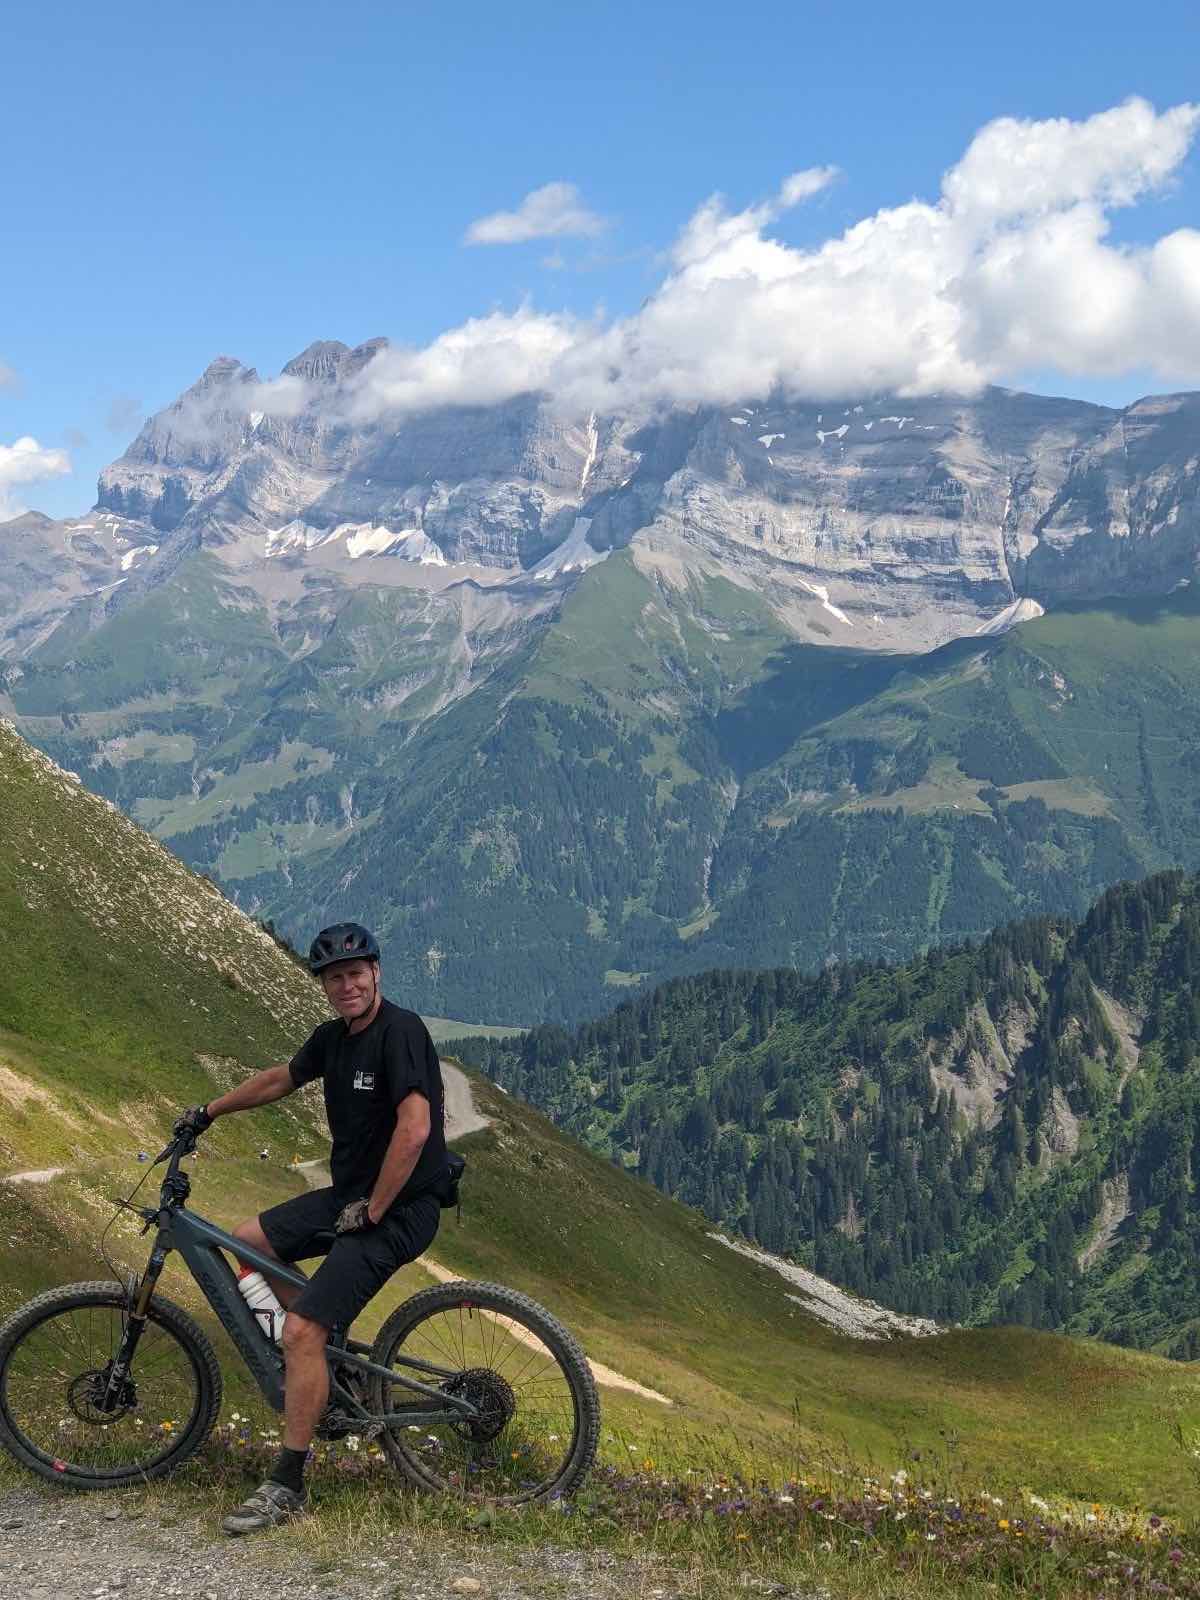 bikerumor pic of the day a cyclist sits on their bike on the edge of a mountain pass overlooking the alps, it is a sunny day.